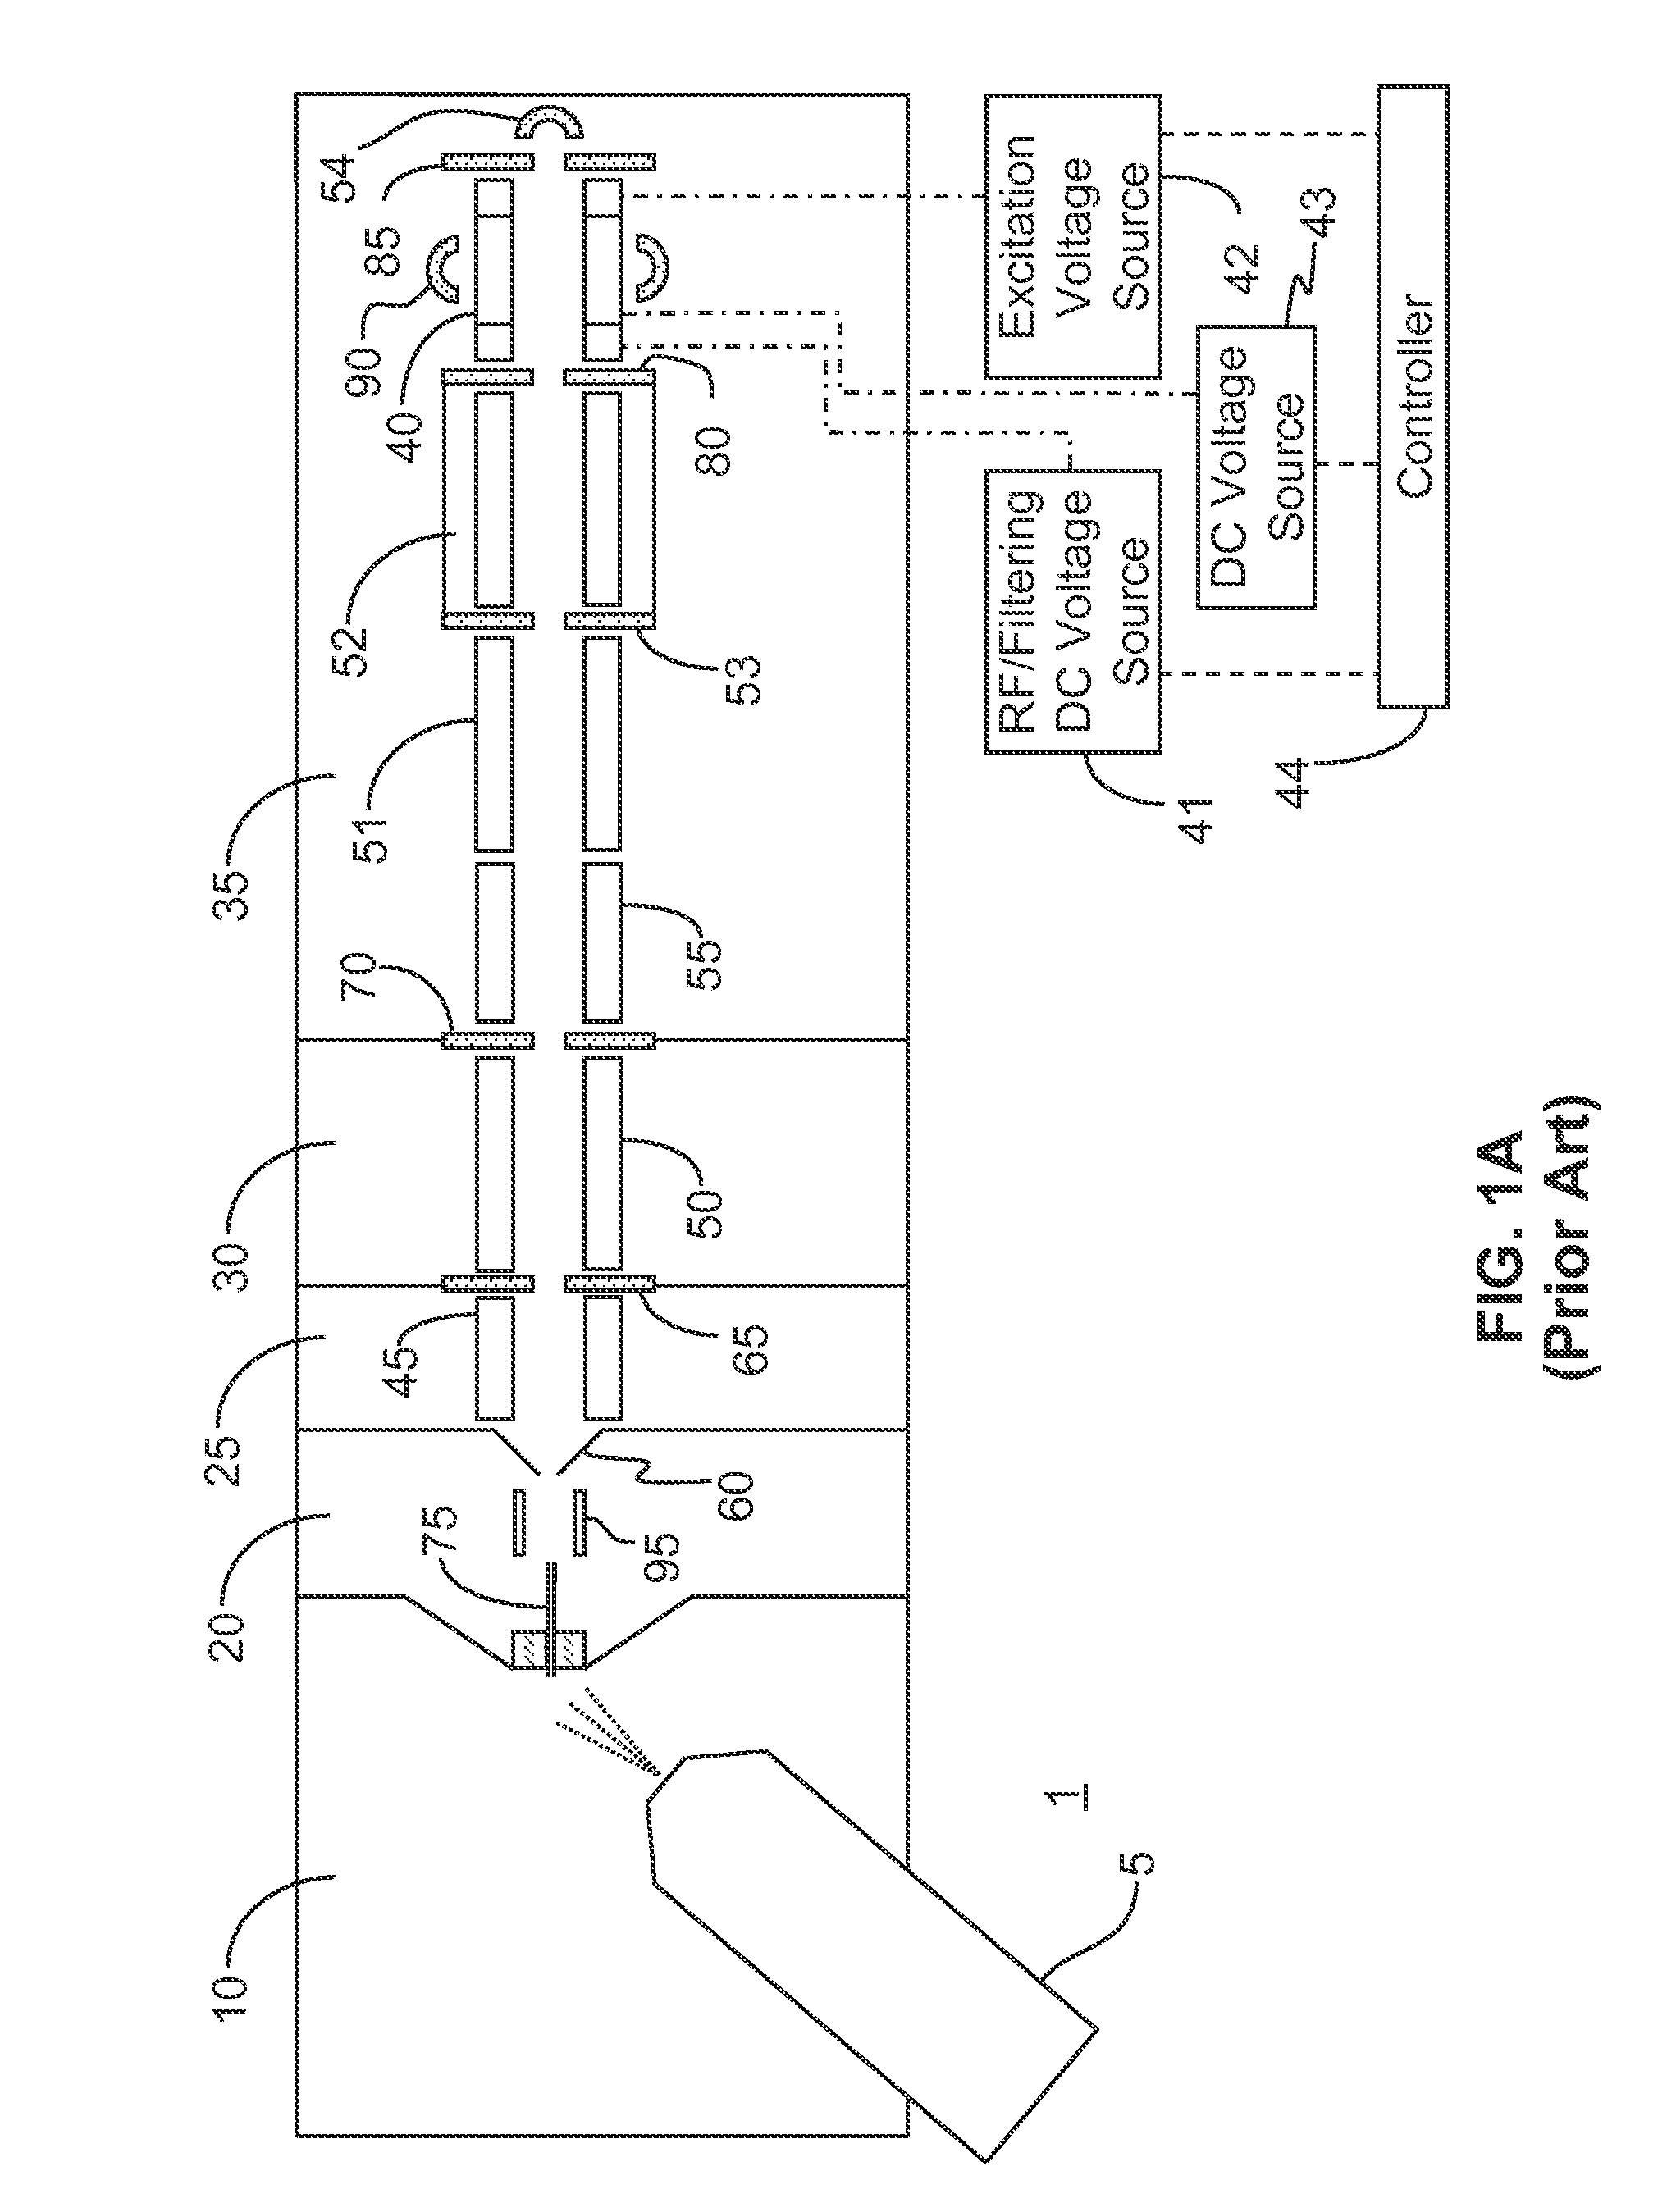 Method for Mass Spectrometer with Enhanced Sensitivity to Product Ions